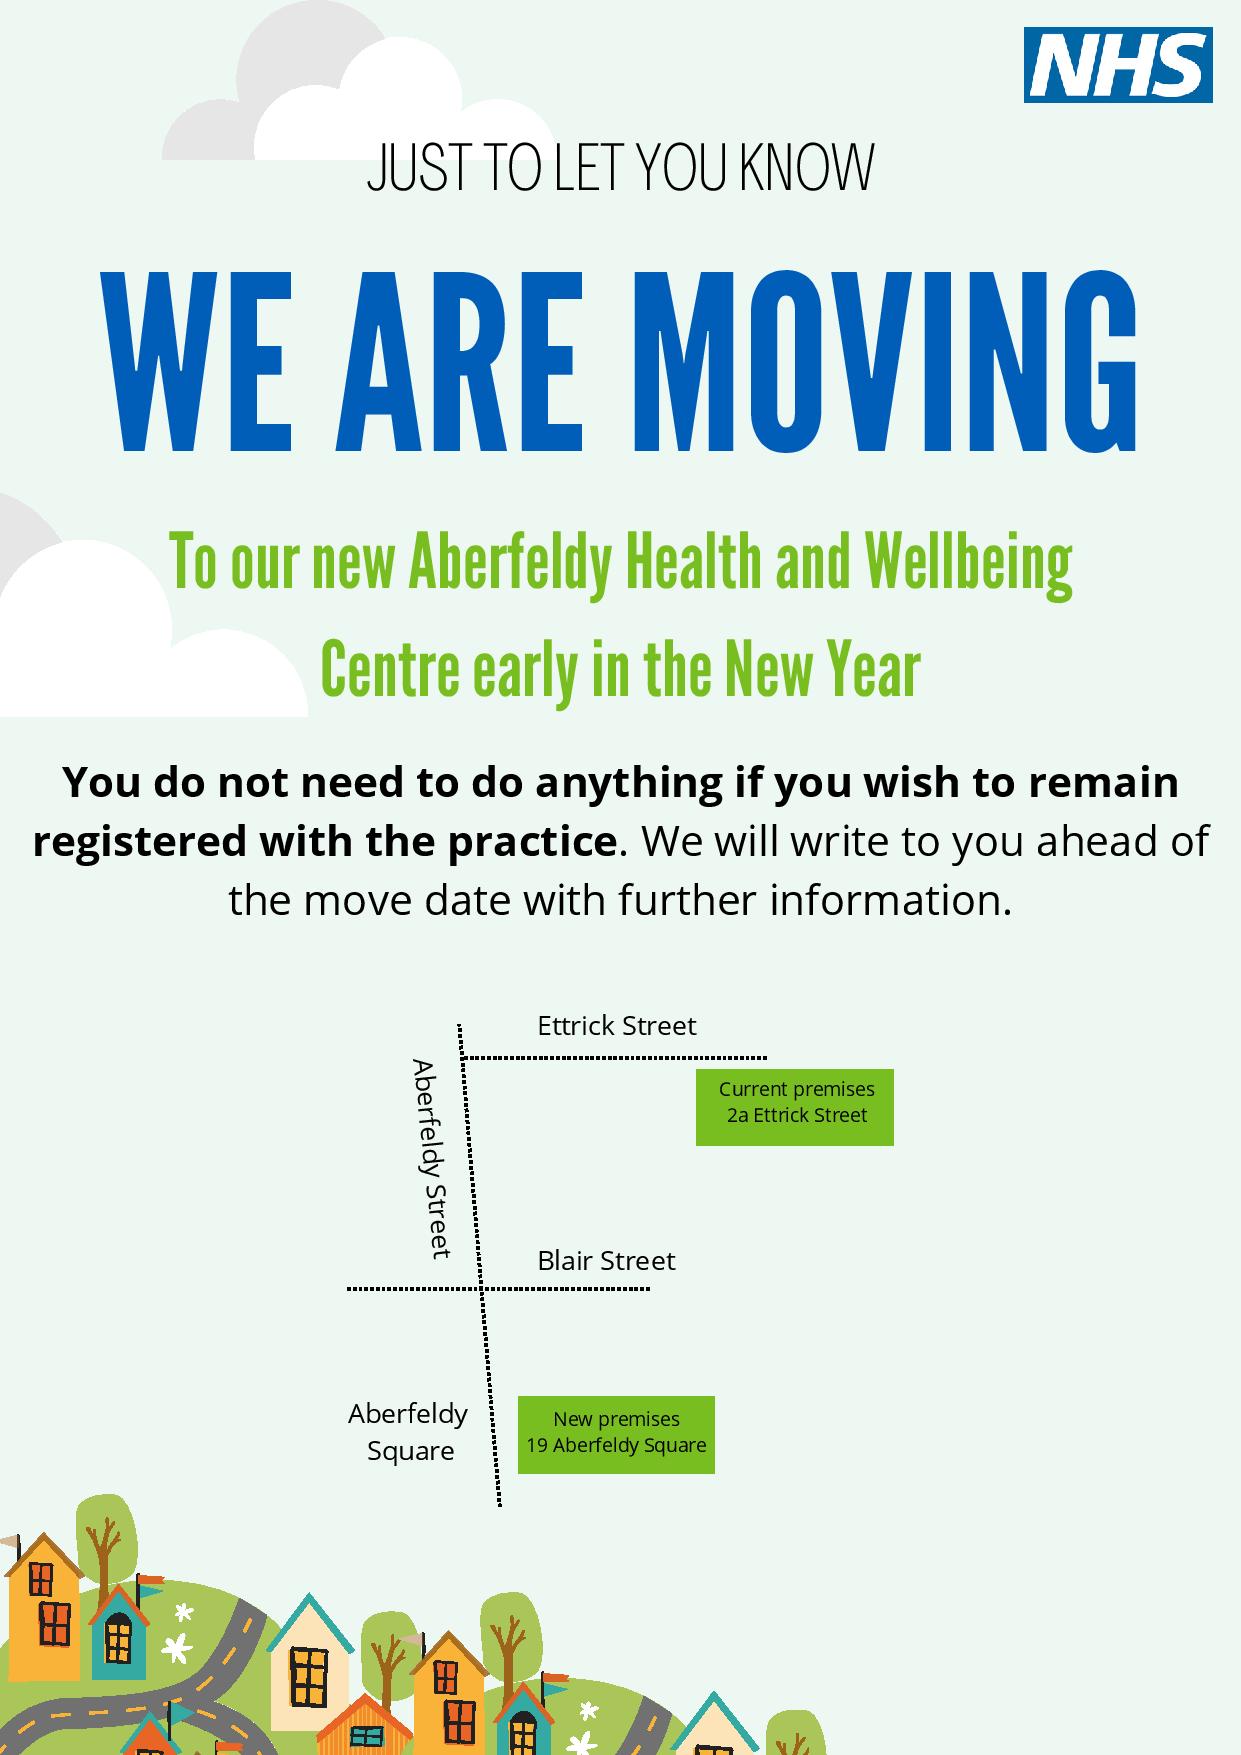 we are moving poster